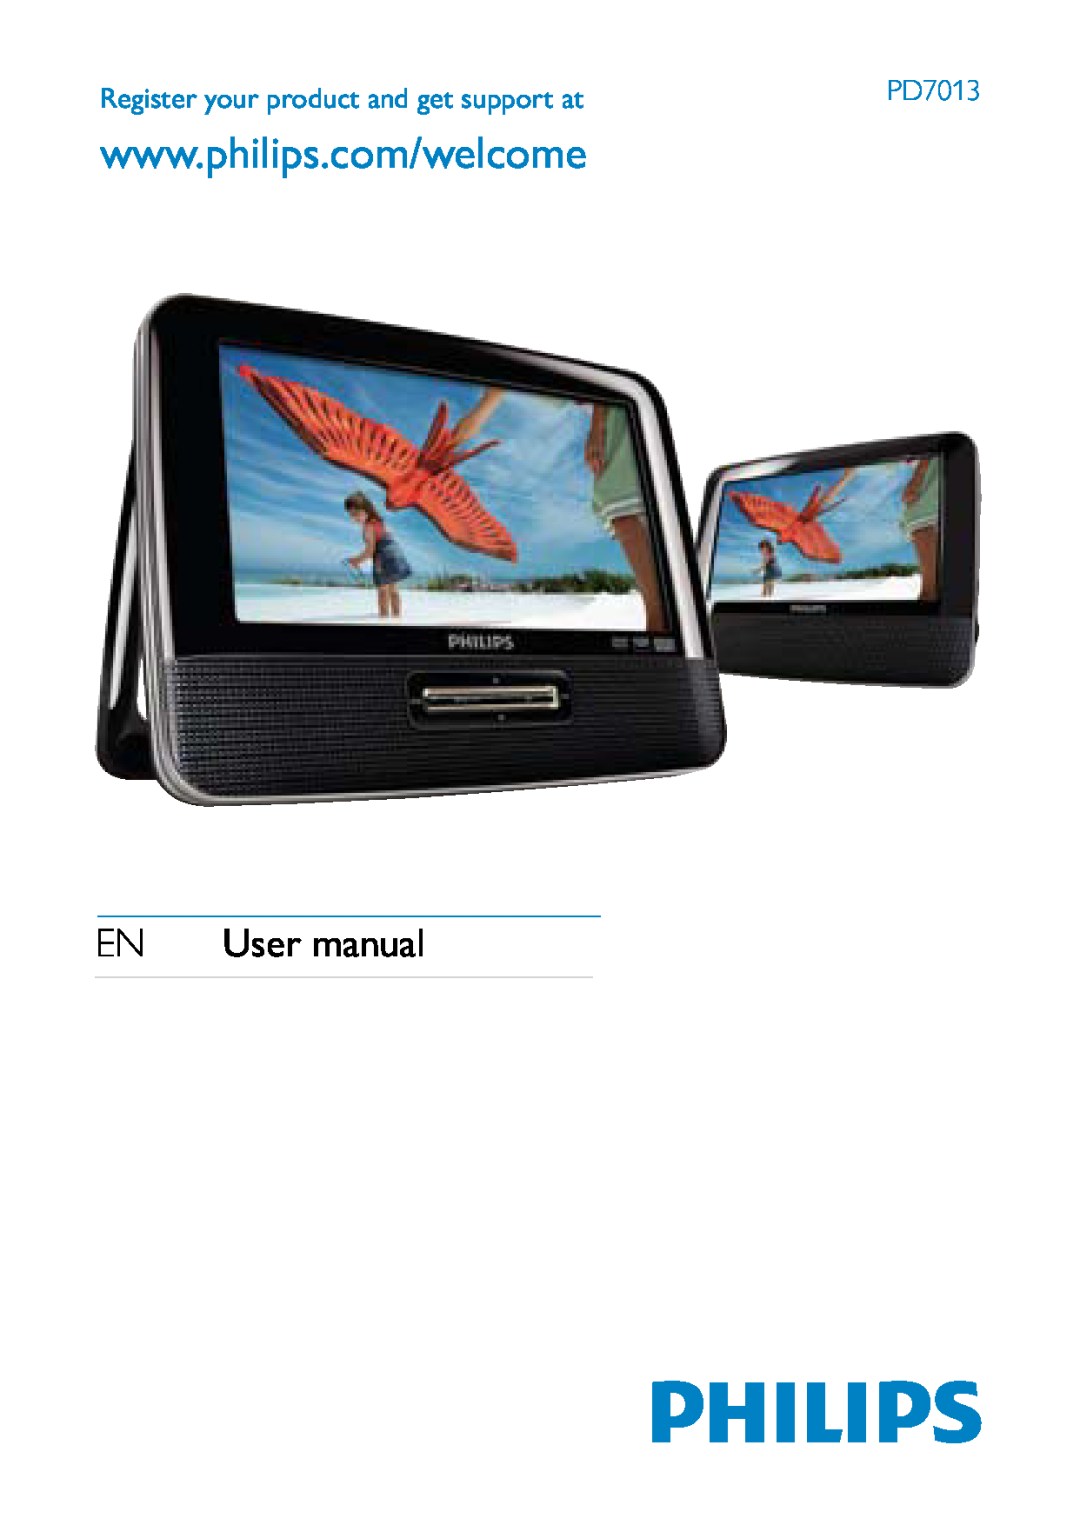 Philips PD7013/79 user manual EN User manual, Register your product and get support at 